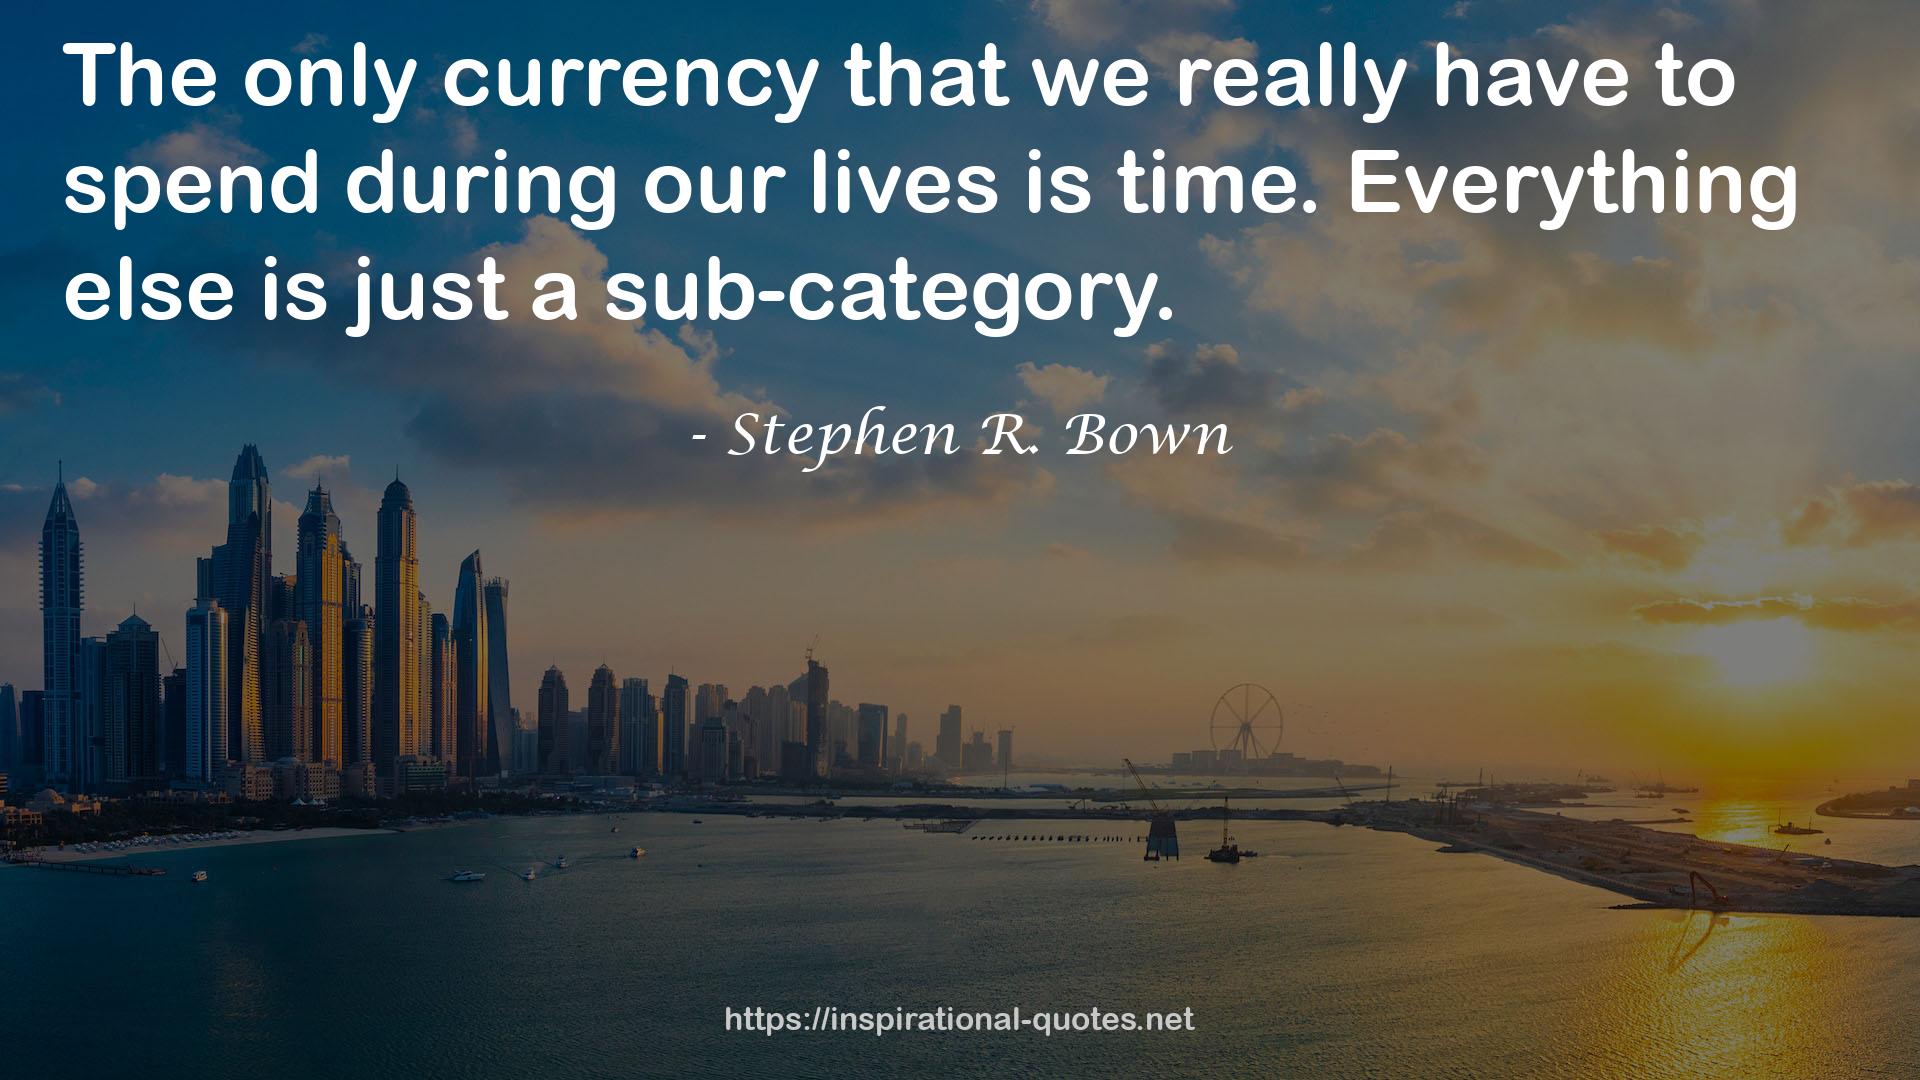 Stephen R. Bown QUOTES